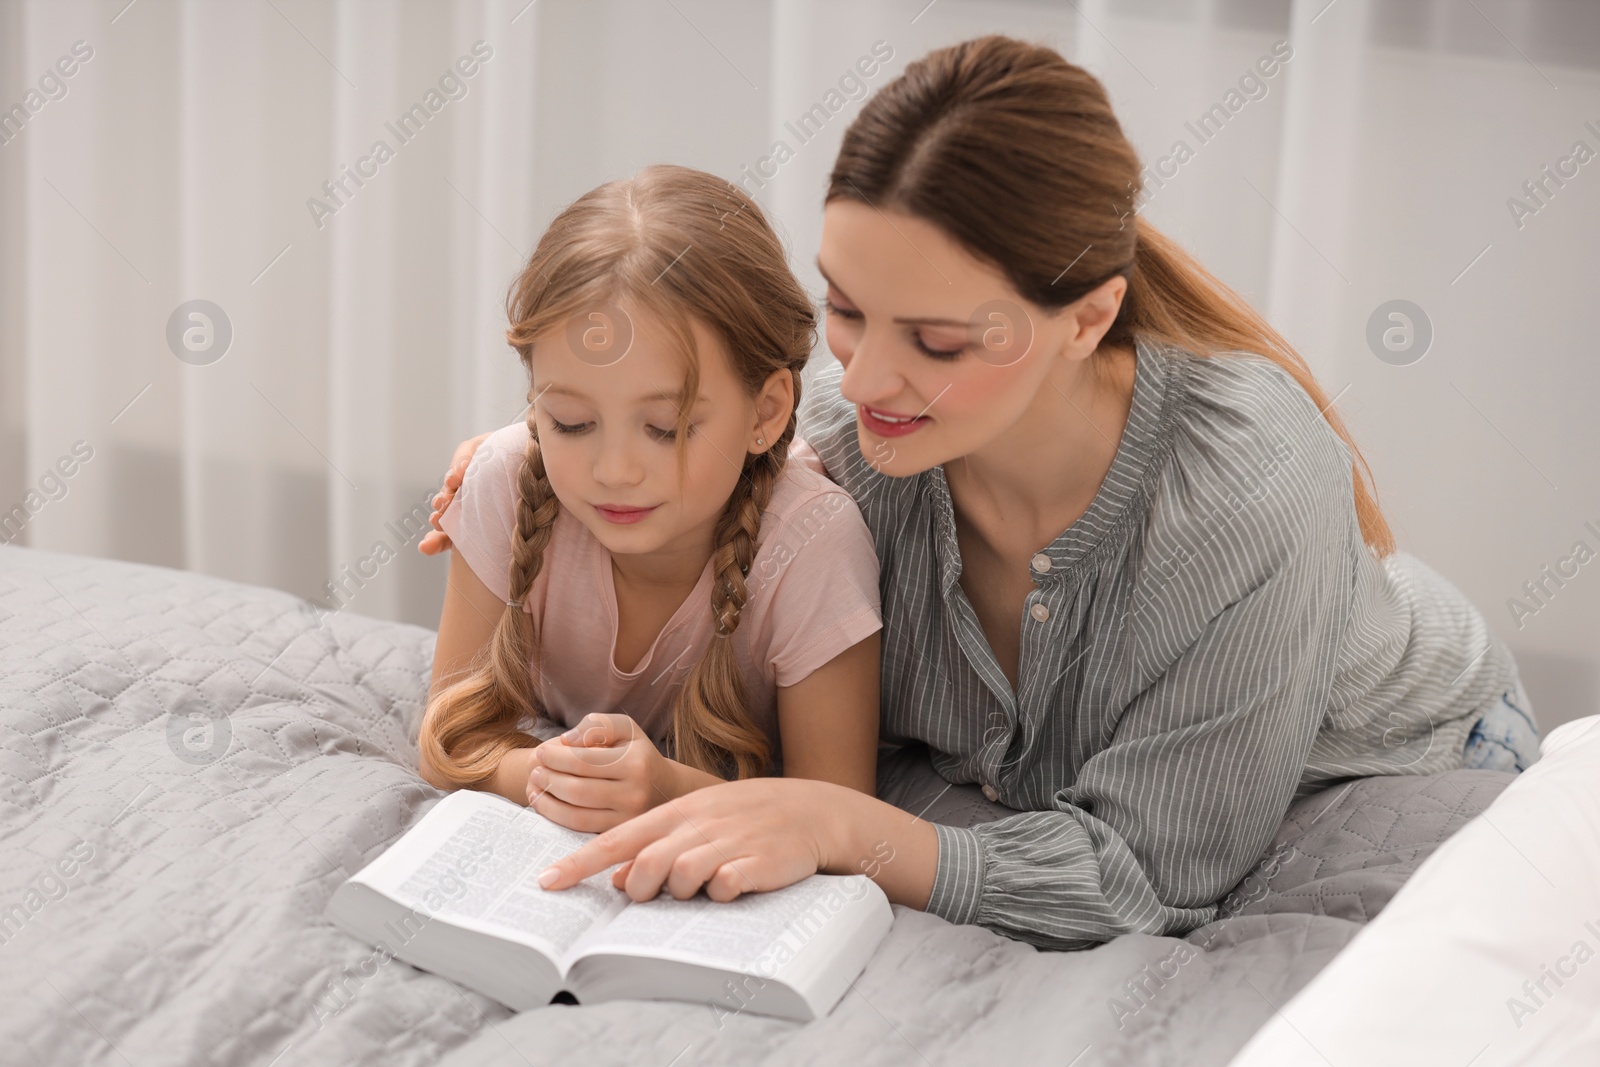 Photo of Girl and her godparent reading Bible together at home